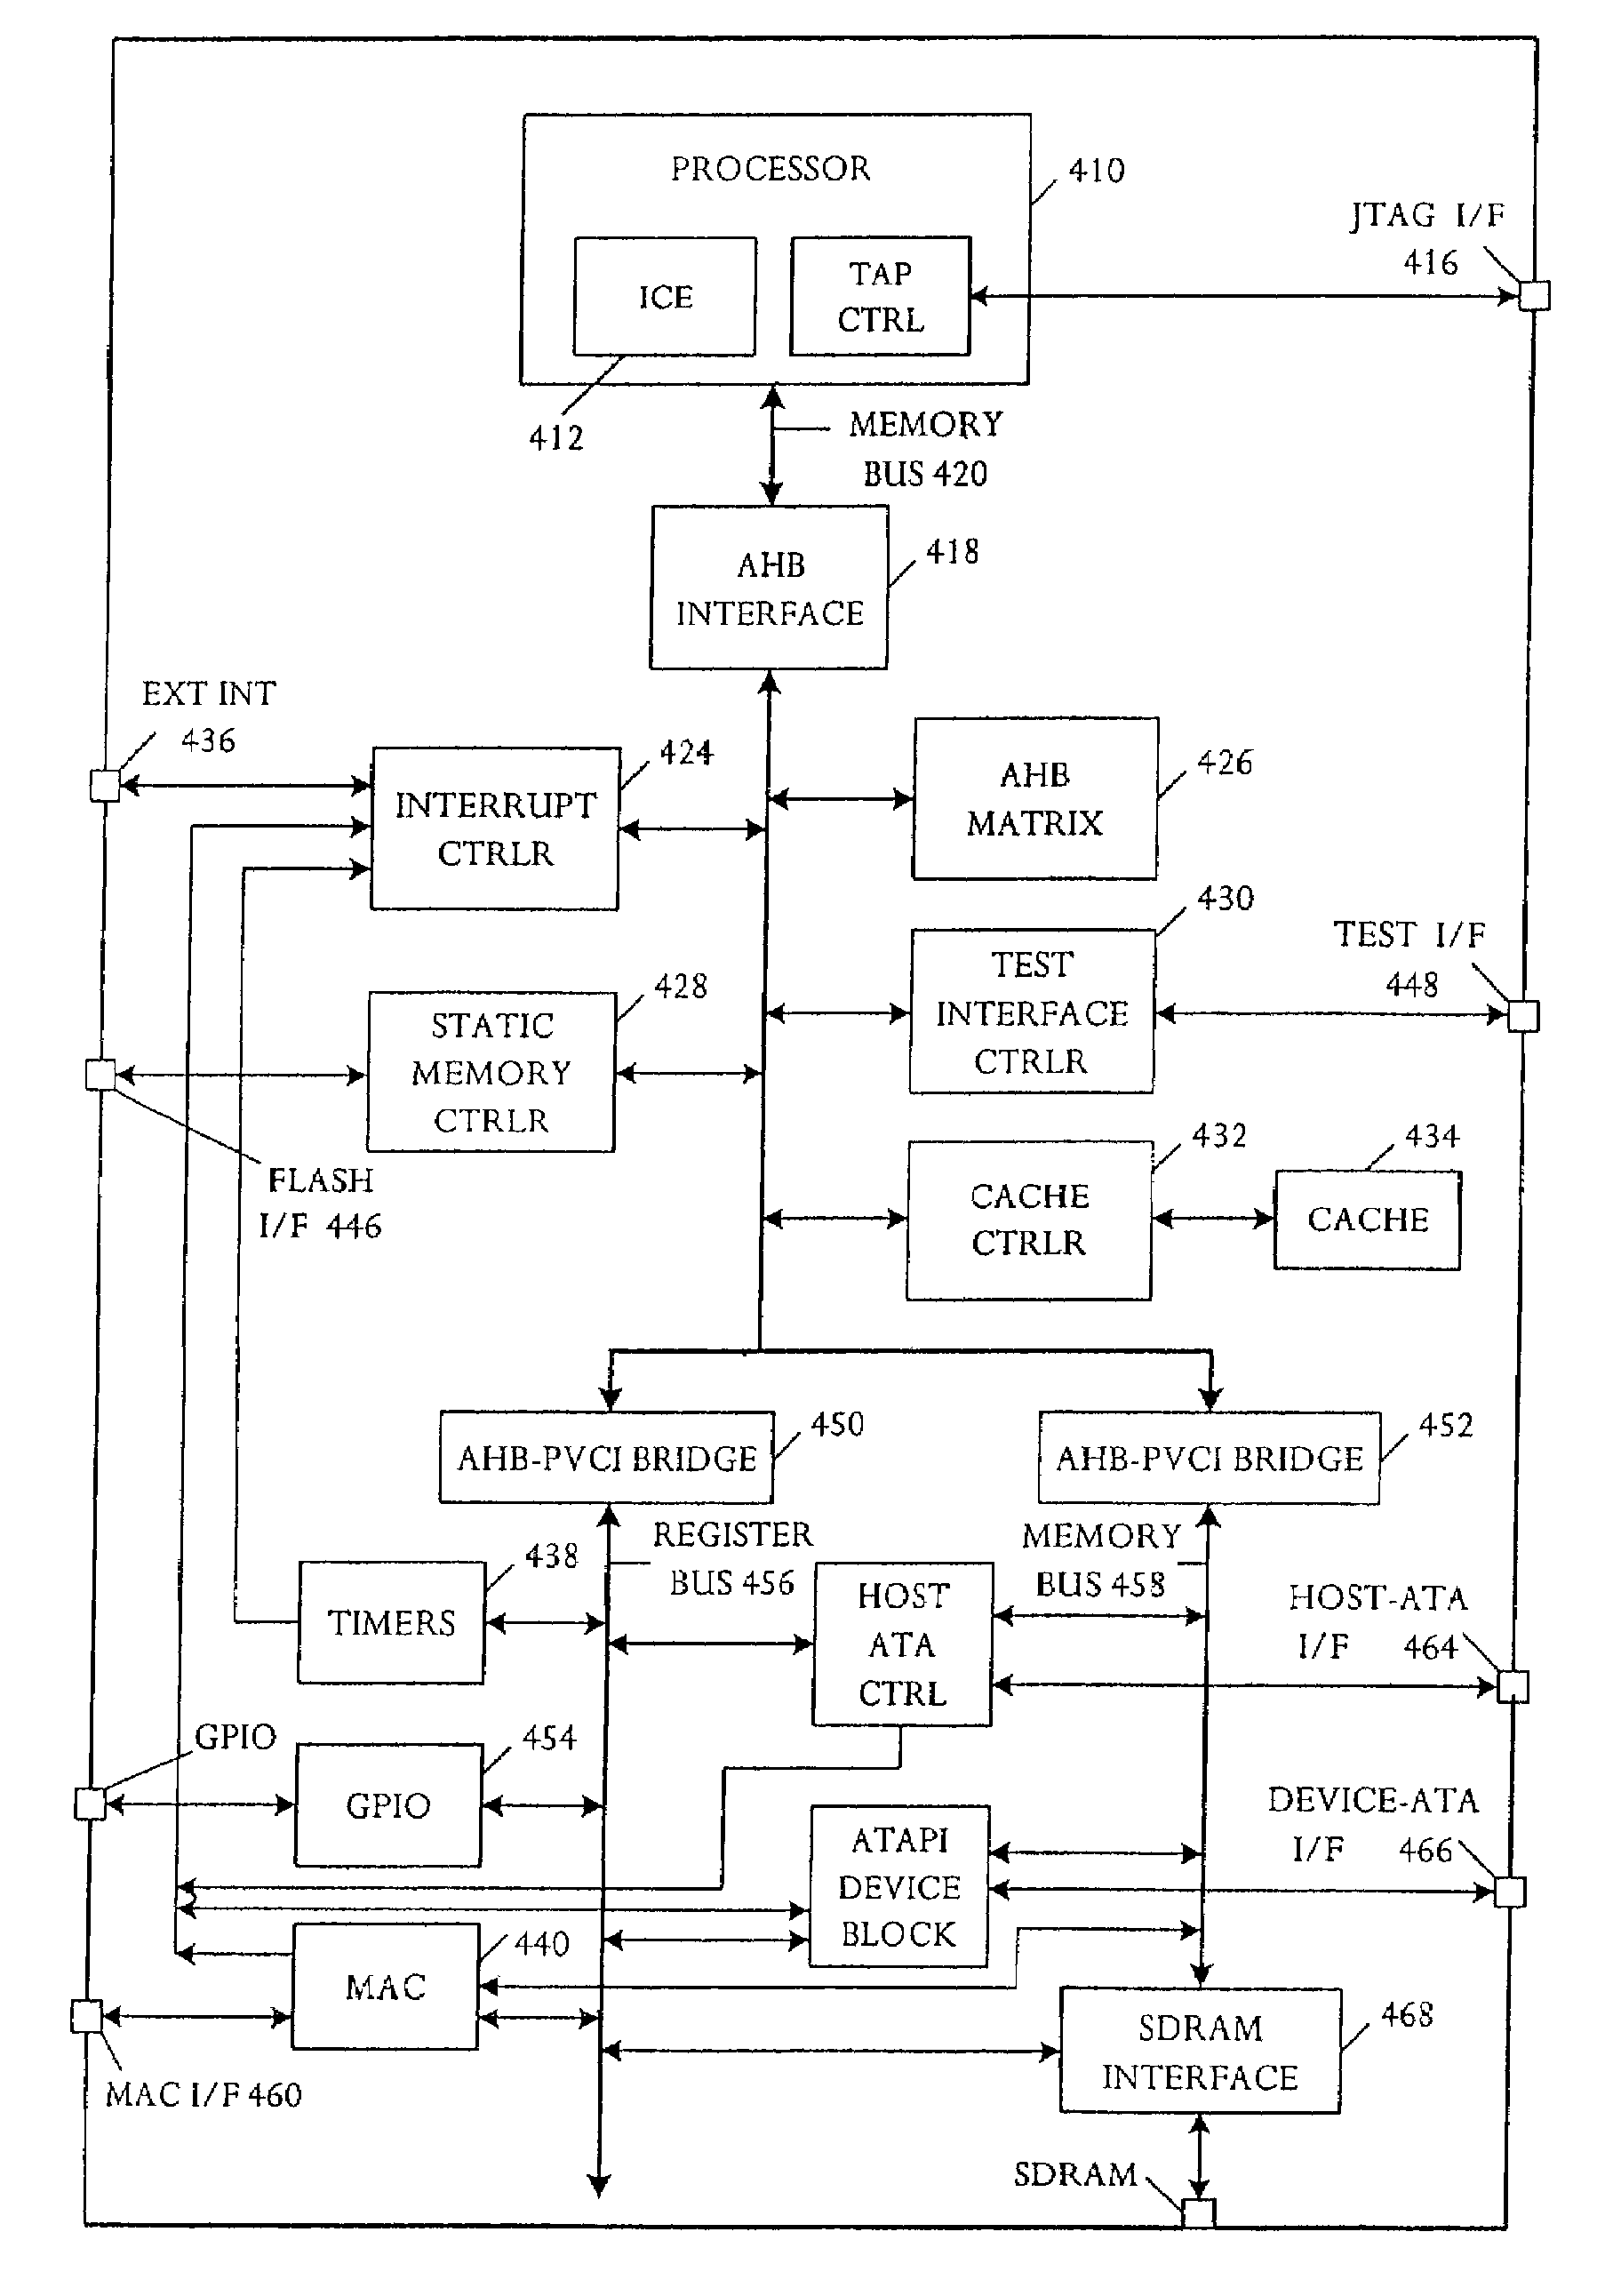 Emulator-enabled network connectivity to a device